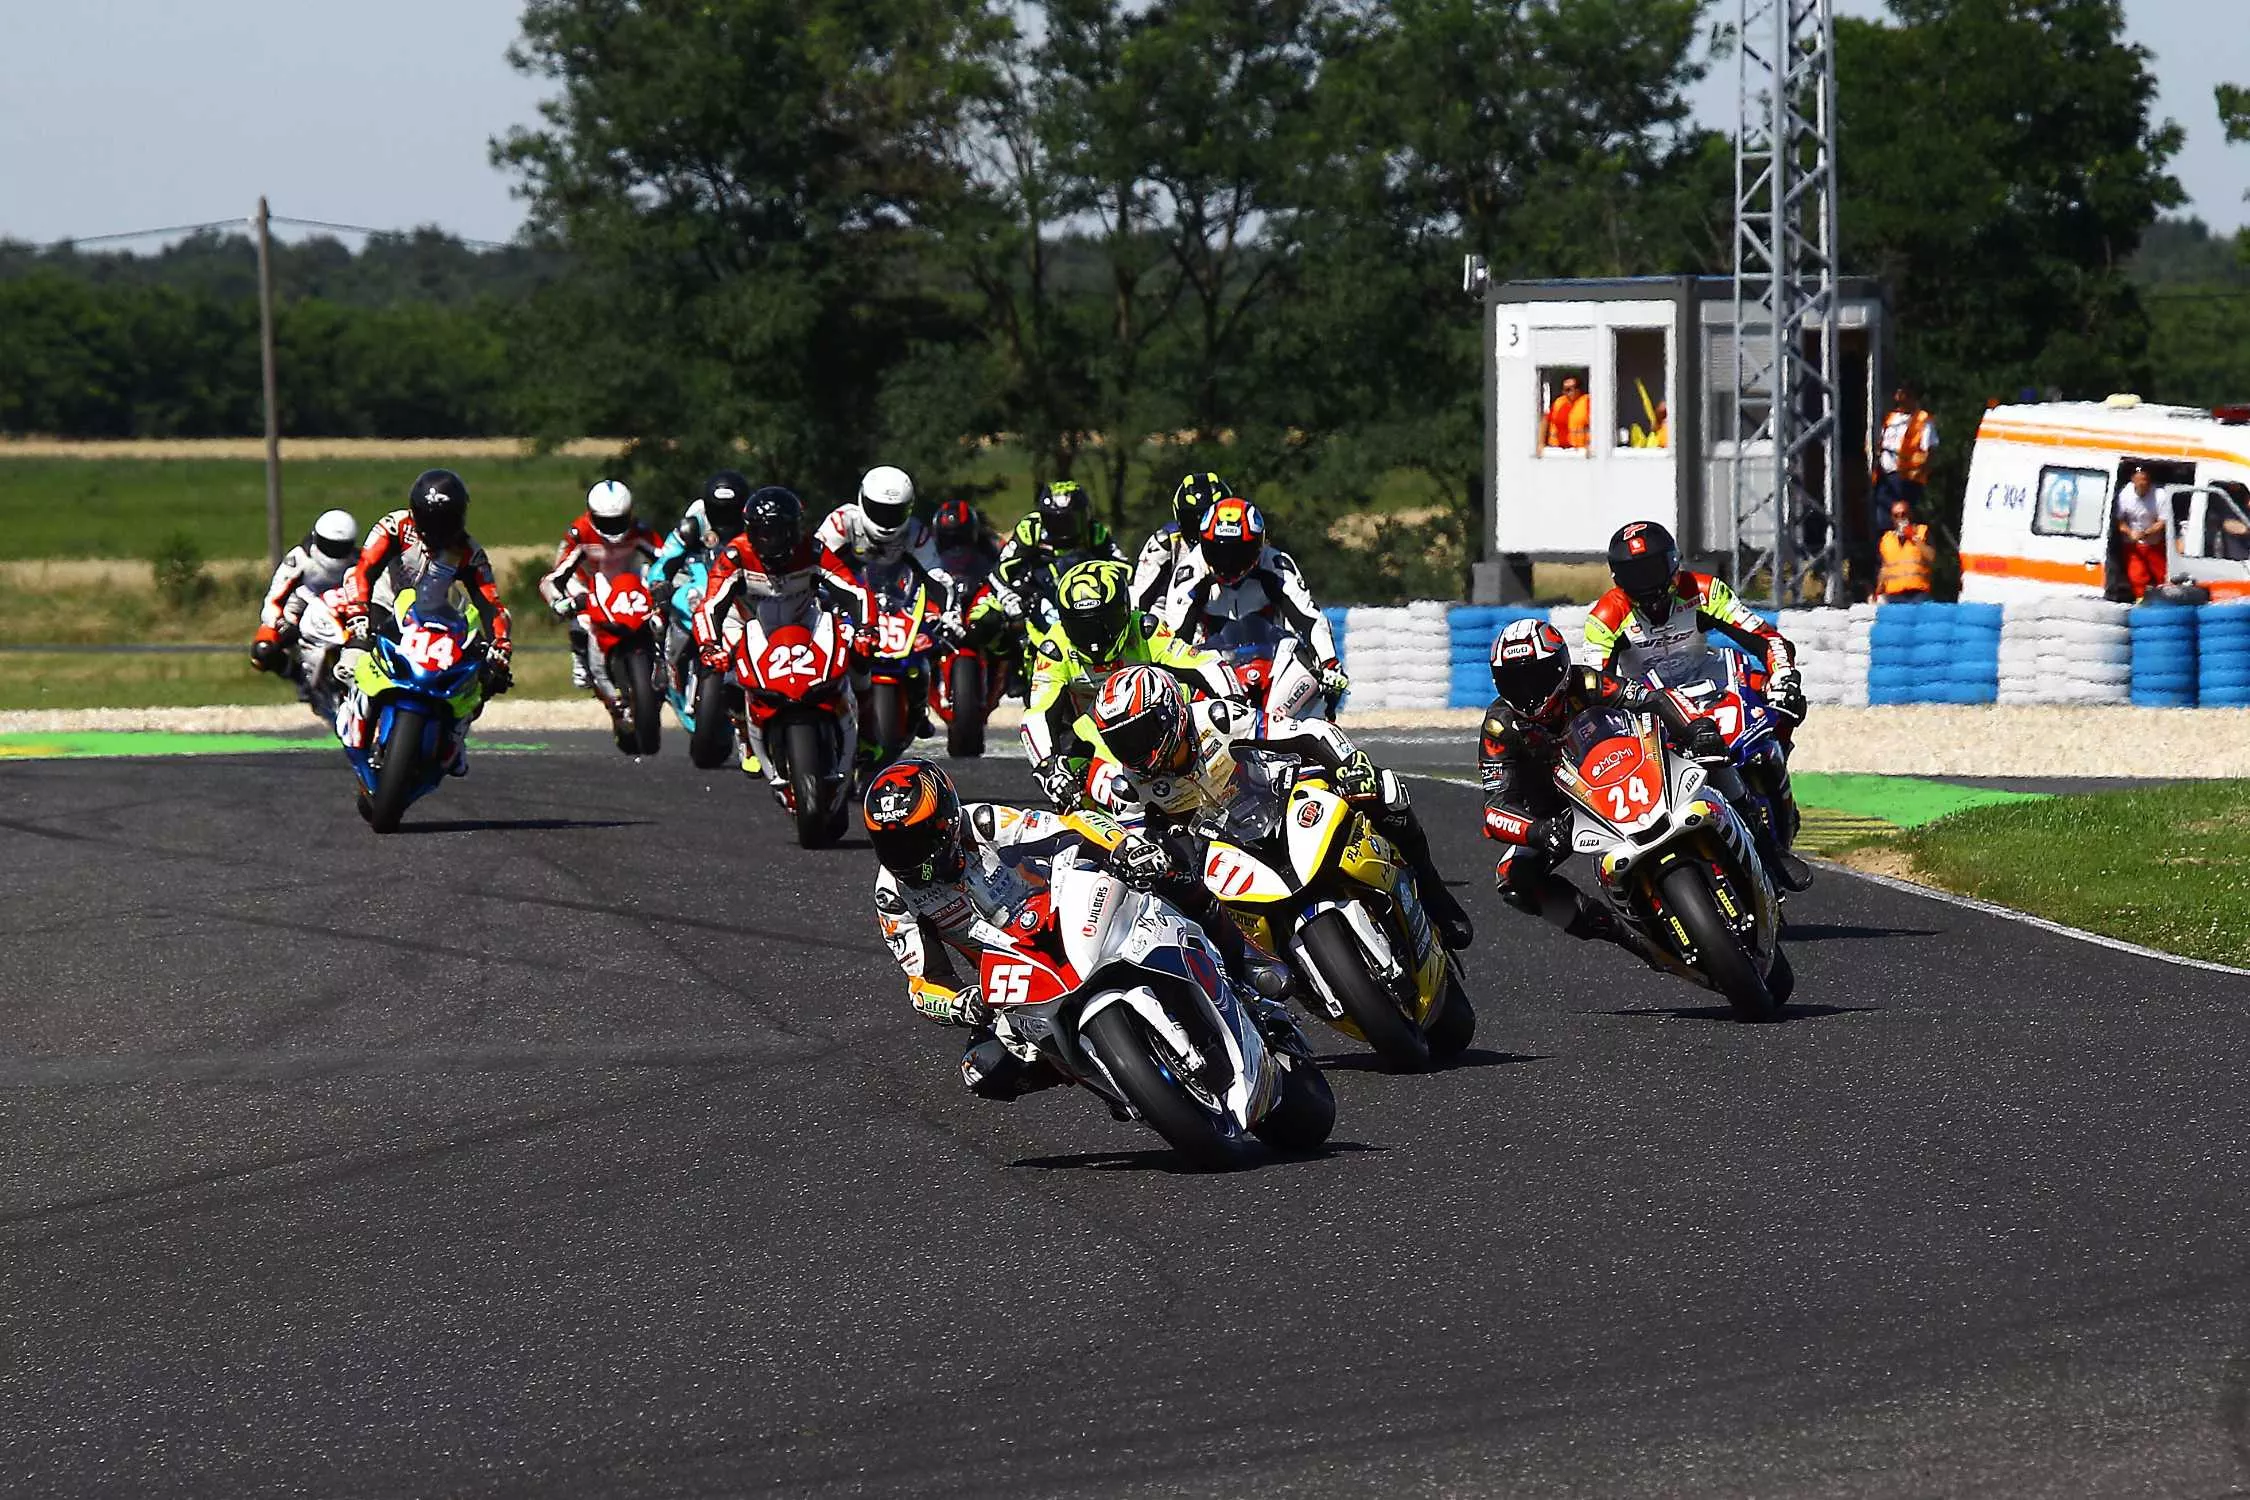 Pannonia Ring in Hungary, Europe | Racing,Motorcycles - Rated 4.5